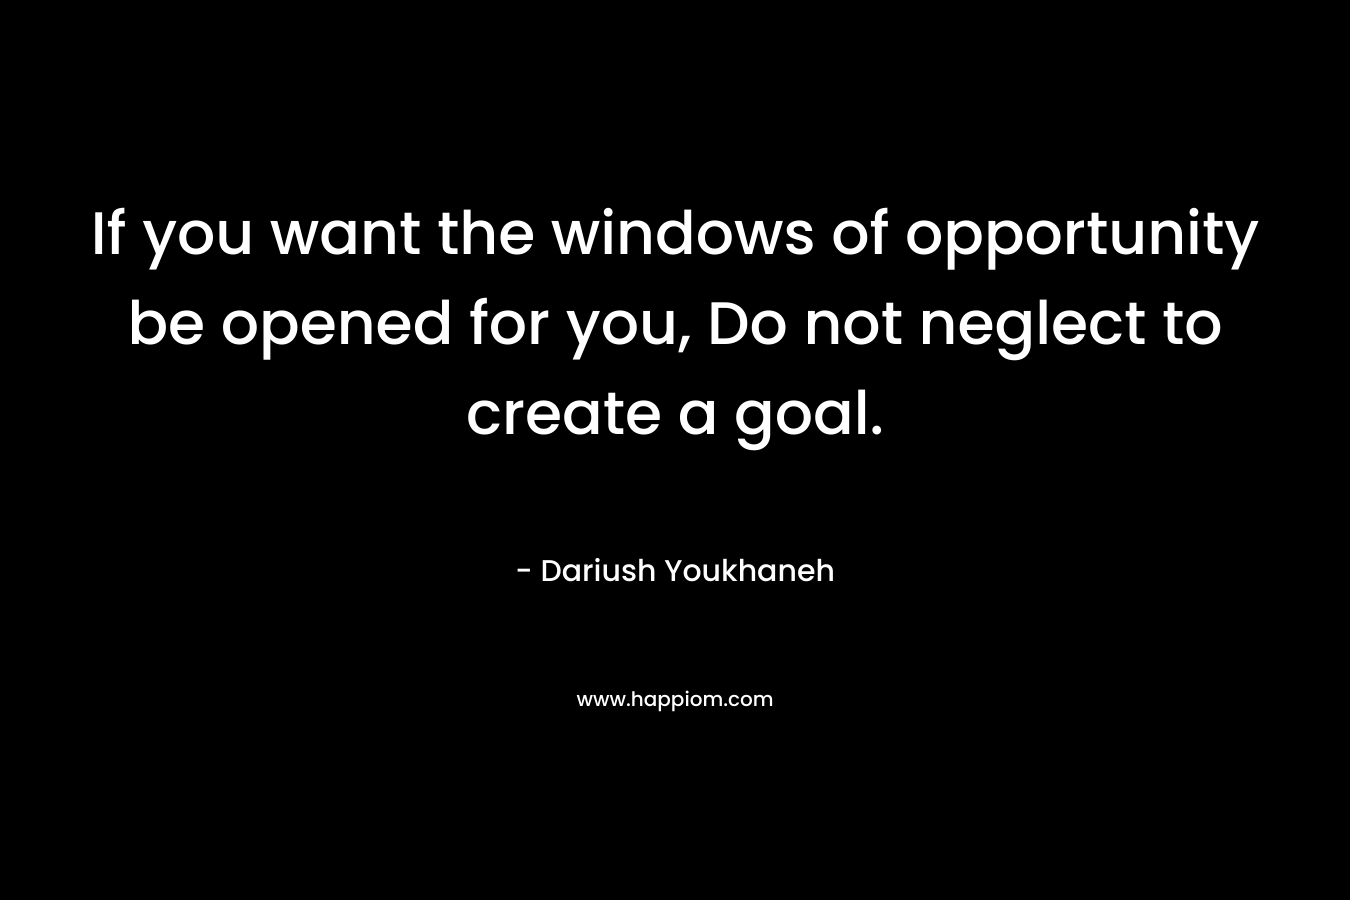 If you want the windows of opportunity be opened for you, Do not neglect to create a goal.